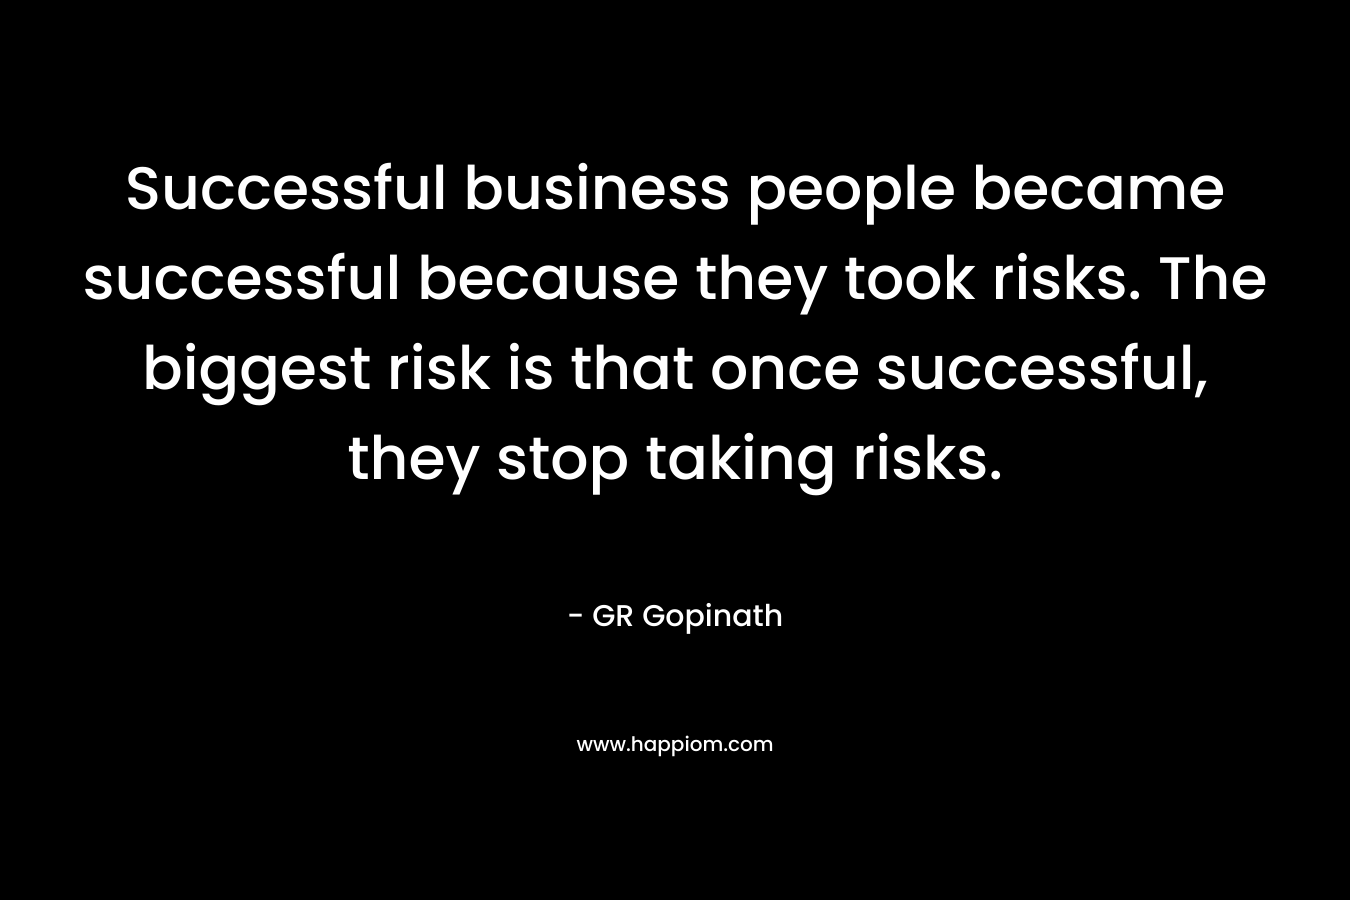 Successful business people became successful because they took risks. The biggest risk is that once successful, they stop taking risks.